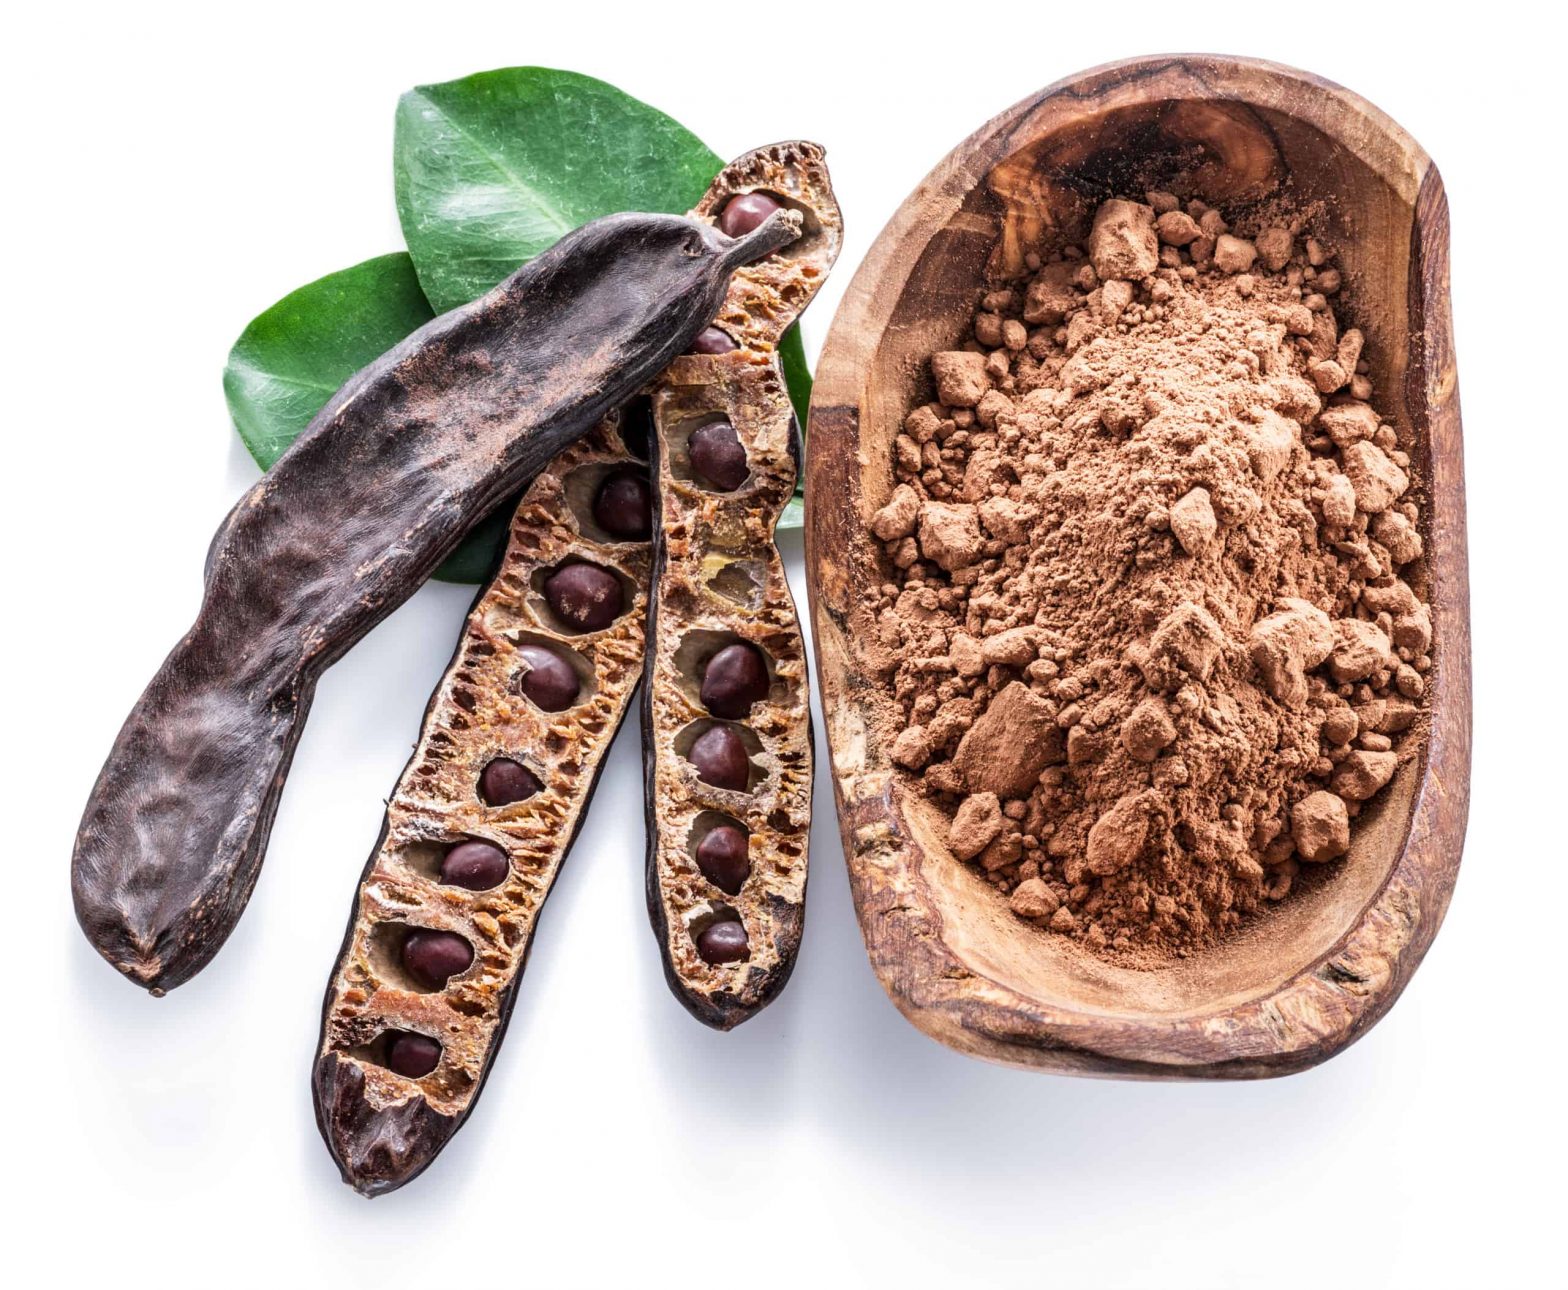 Carob Market Expected to Reach $384,882.3 thousand by 2030